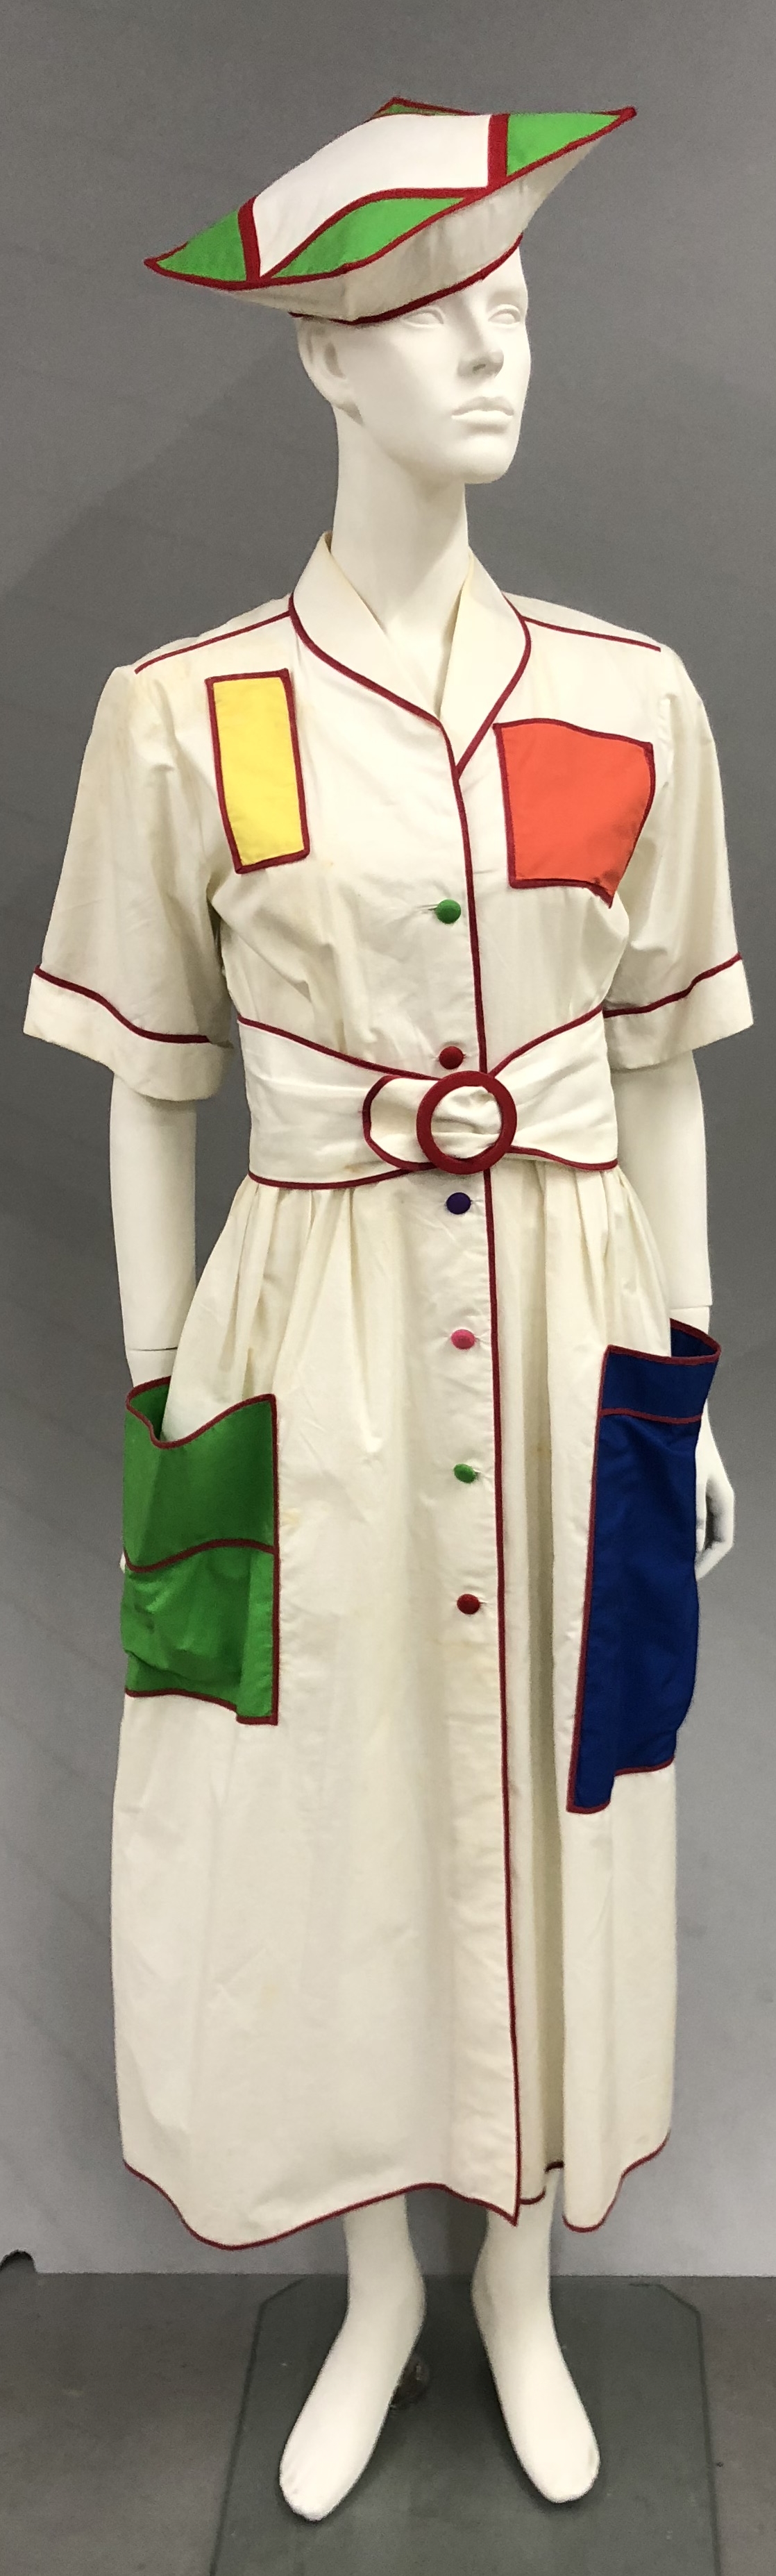 'Mondrian' outfit by Linda Jackson and Peter Tully